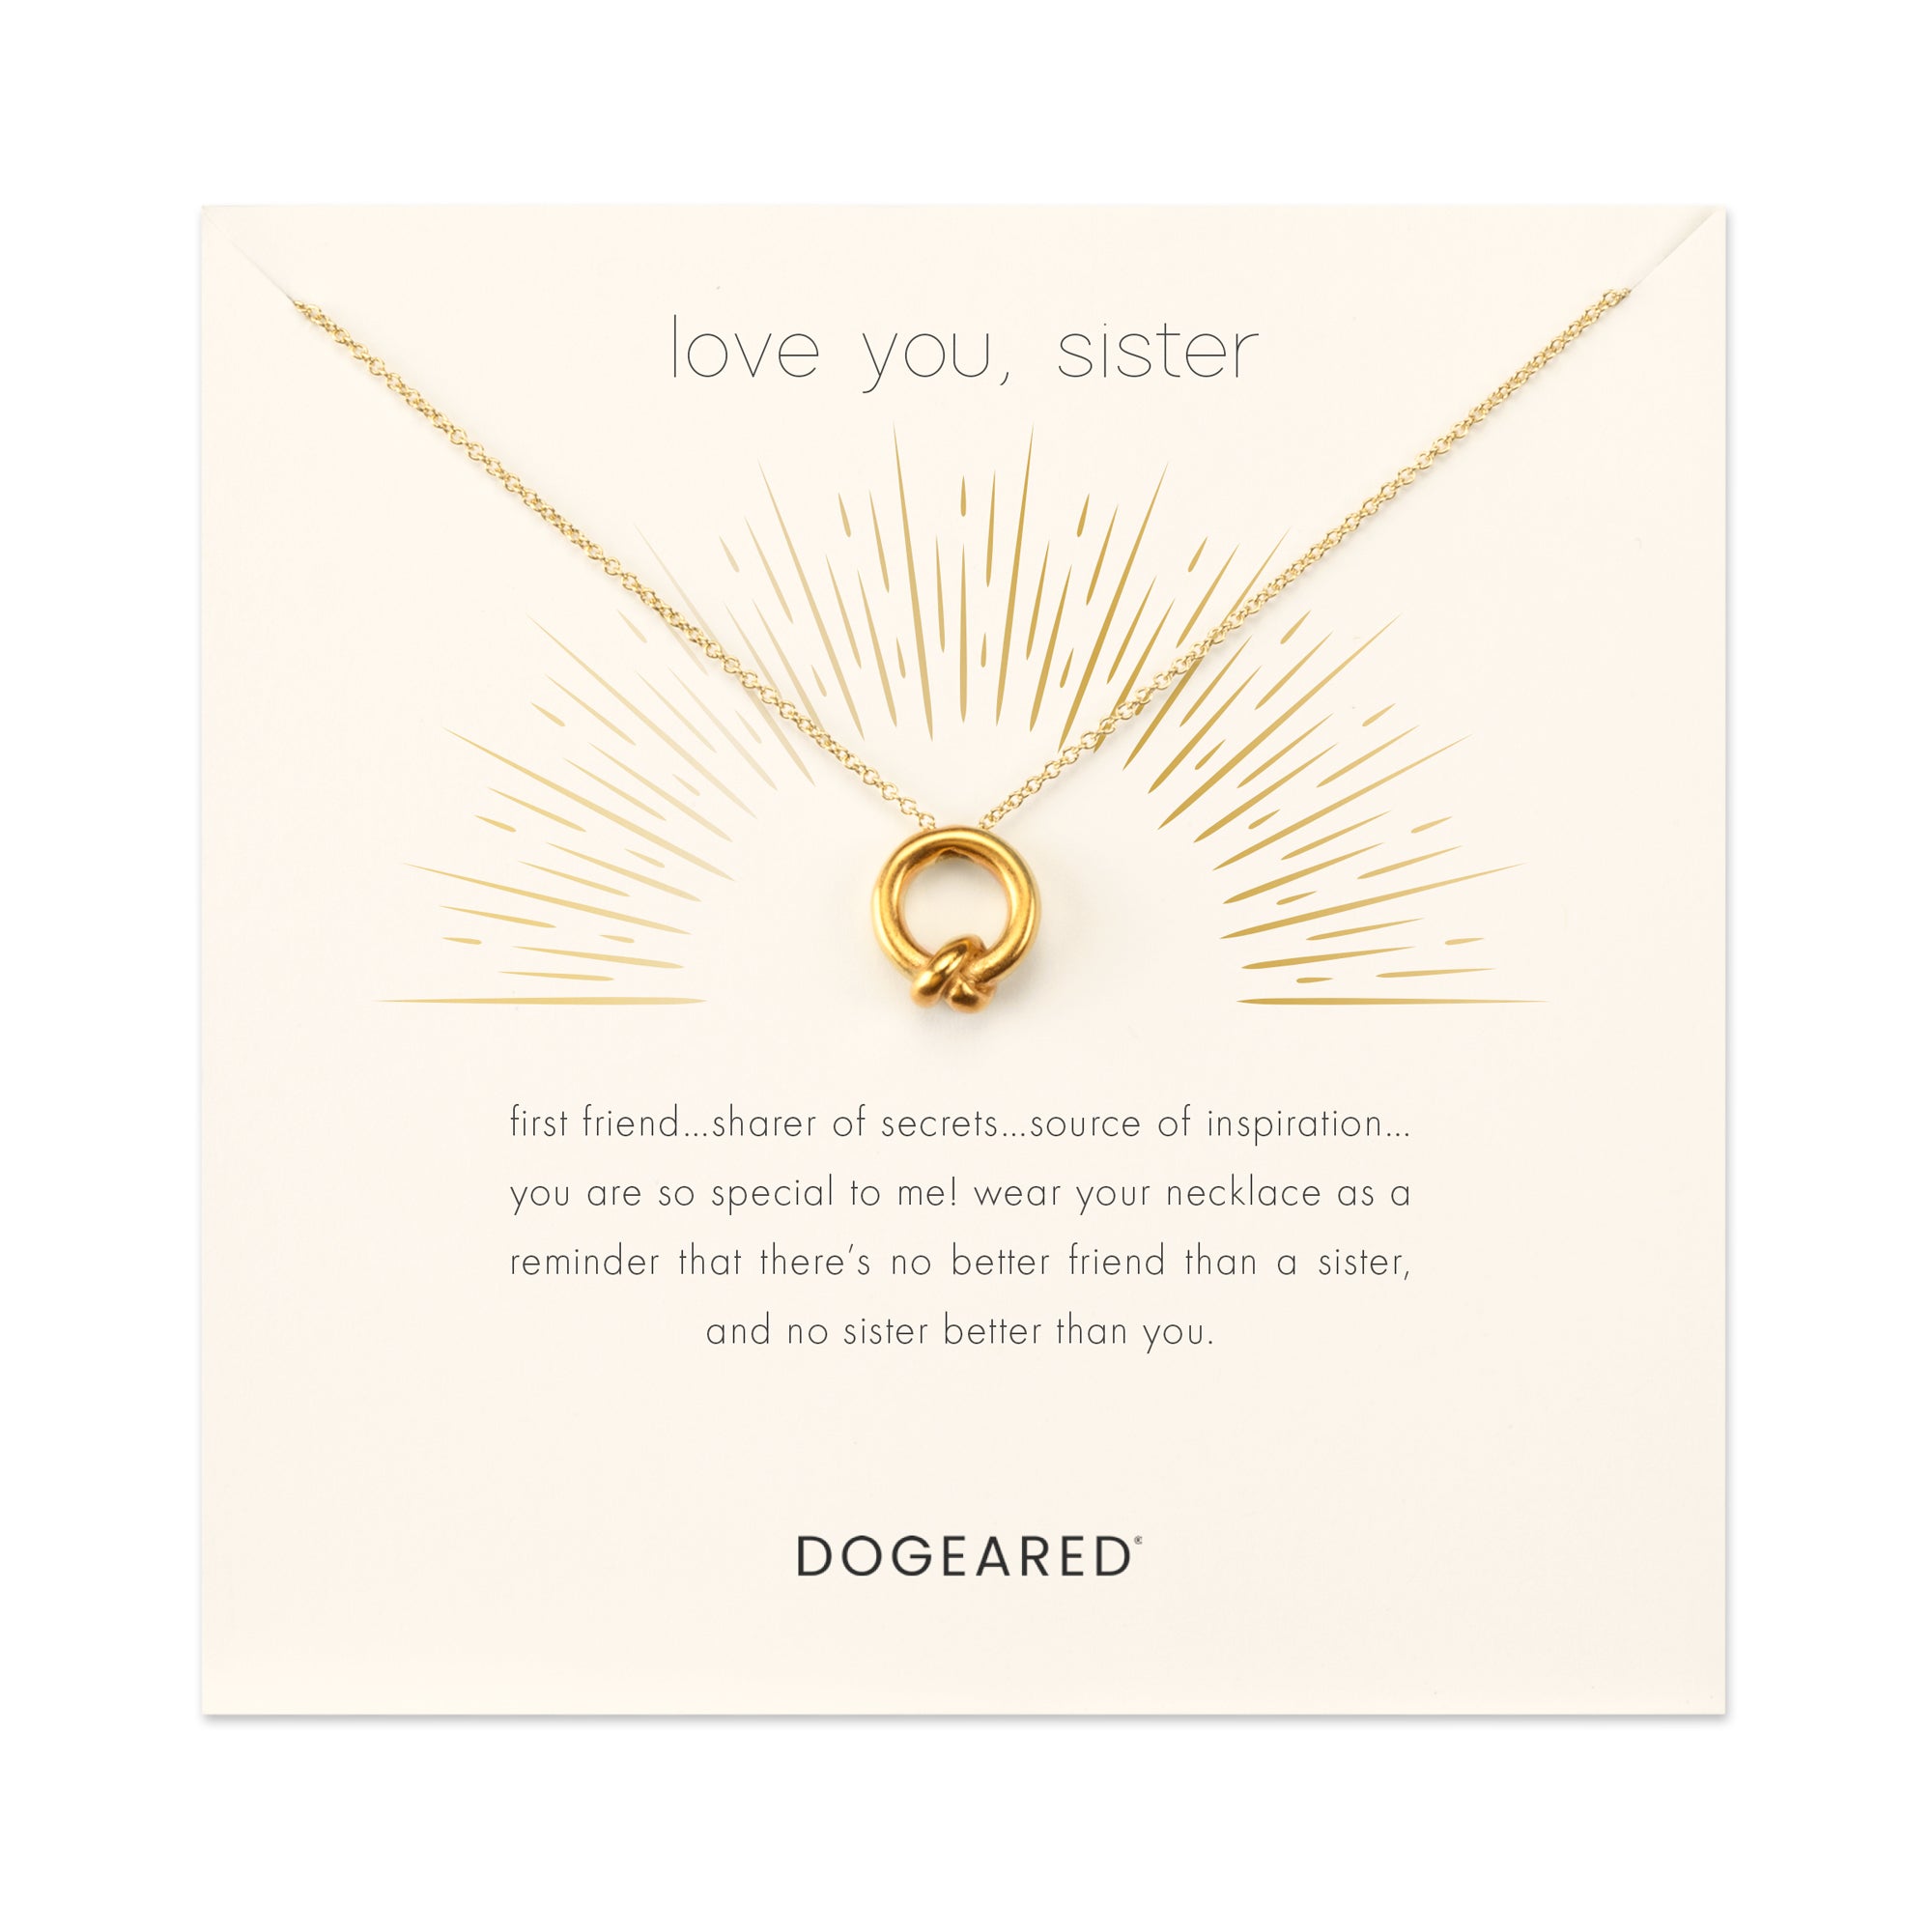 Love you sister necklace - Dogeared